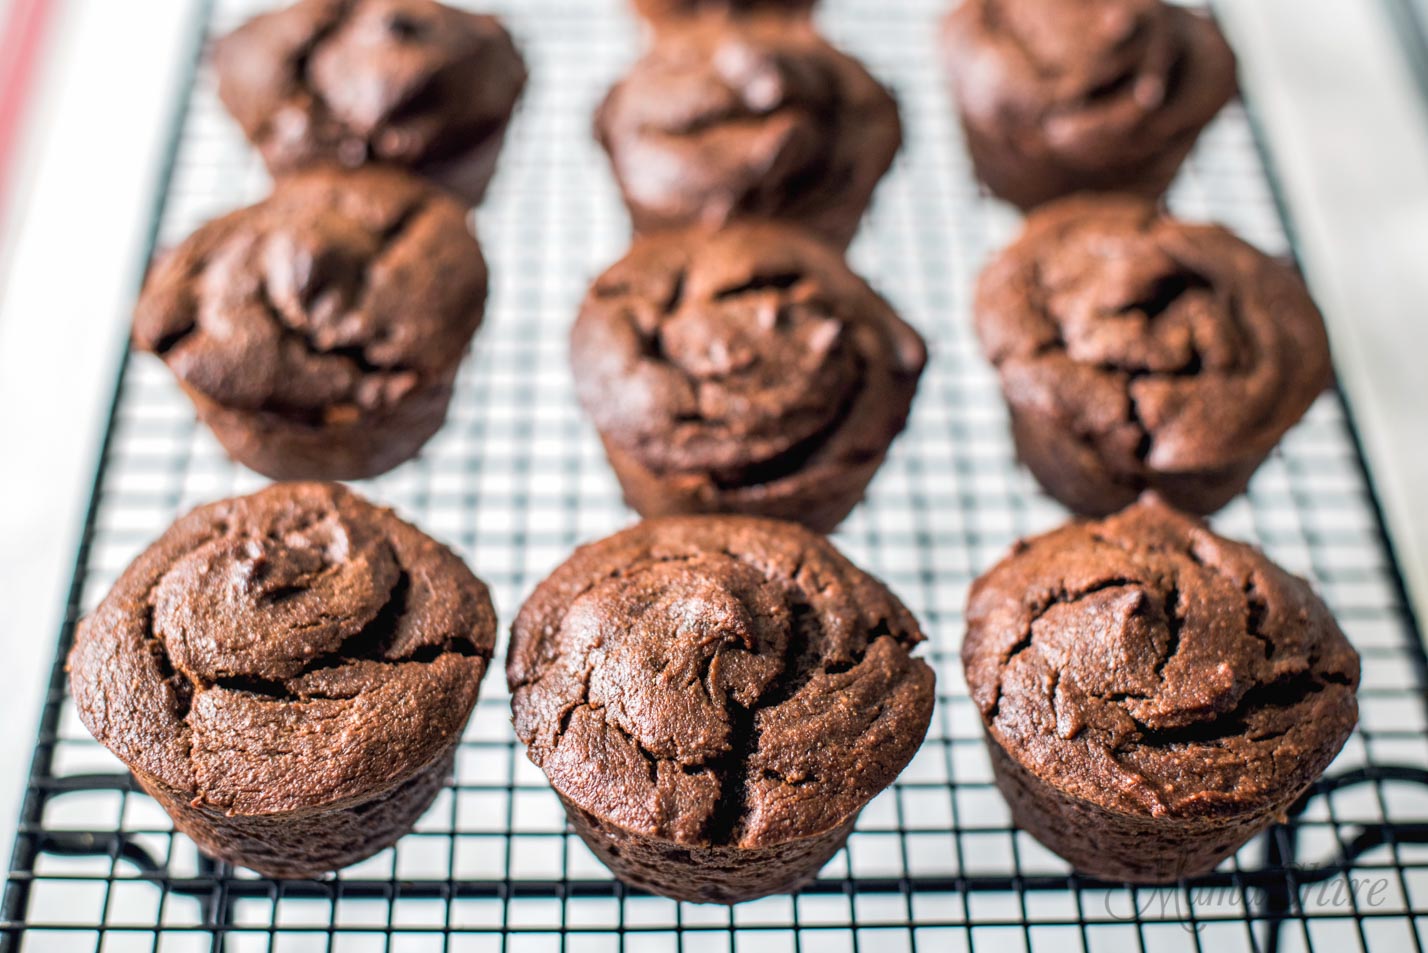 Chocolate Peanut Butter Muffins with summer squash. Gluten-free, dairy-free, sugar-free, low-carb, THM-S. 